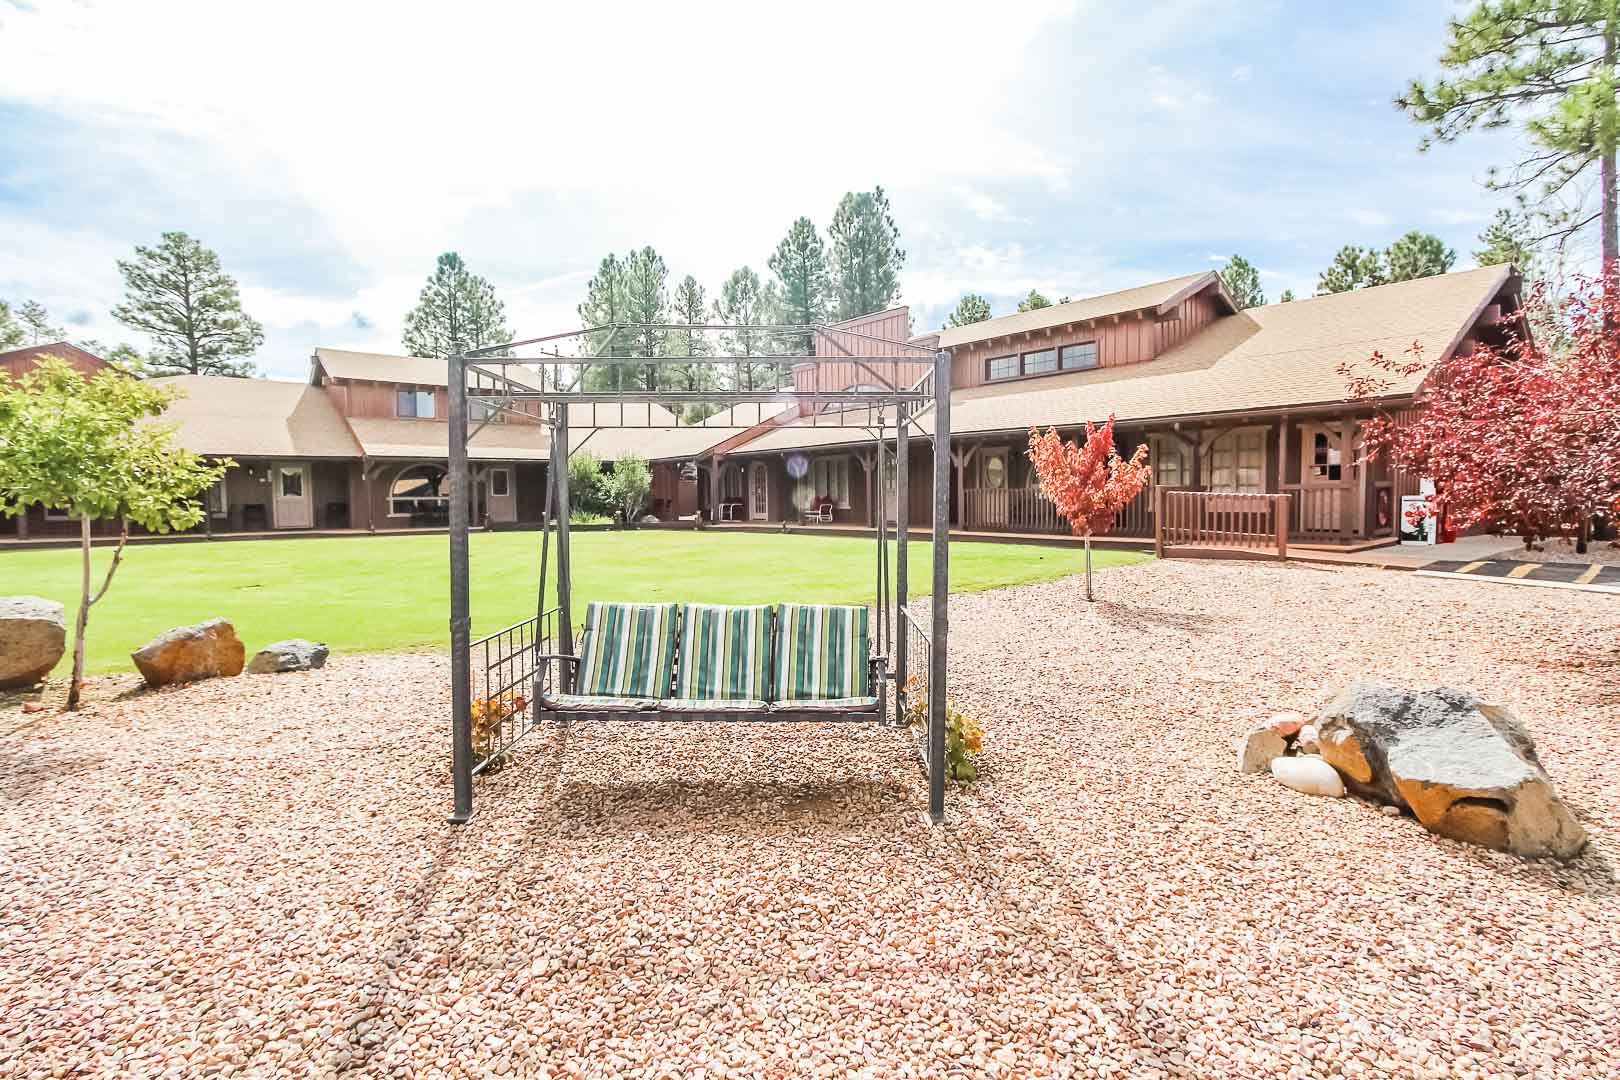 A peaceful view of VRI's Roundhouse Resort in Pinetop, Arizona.